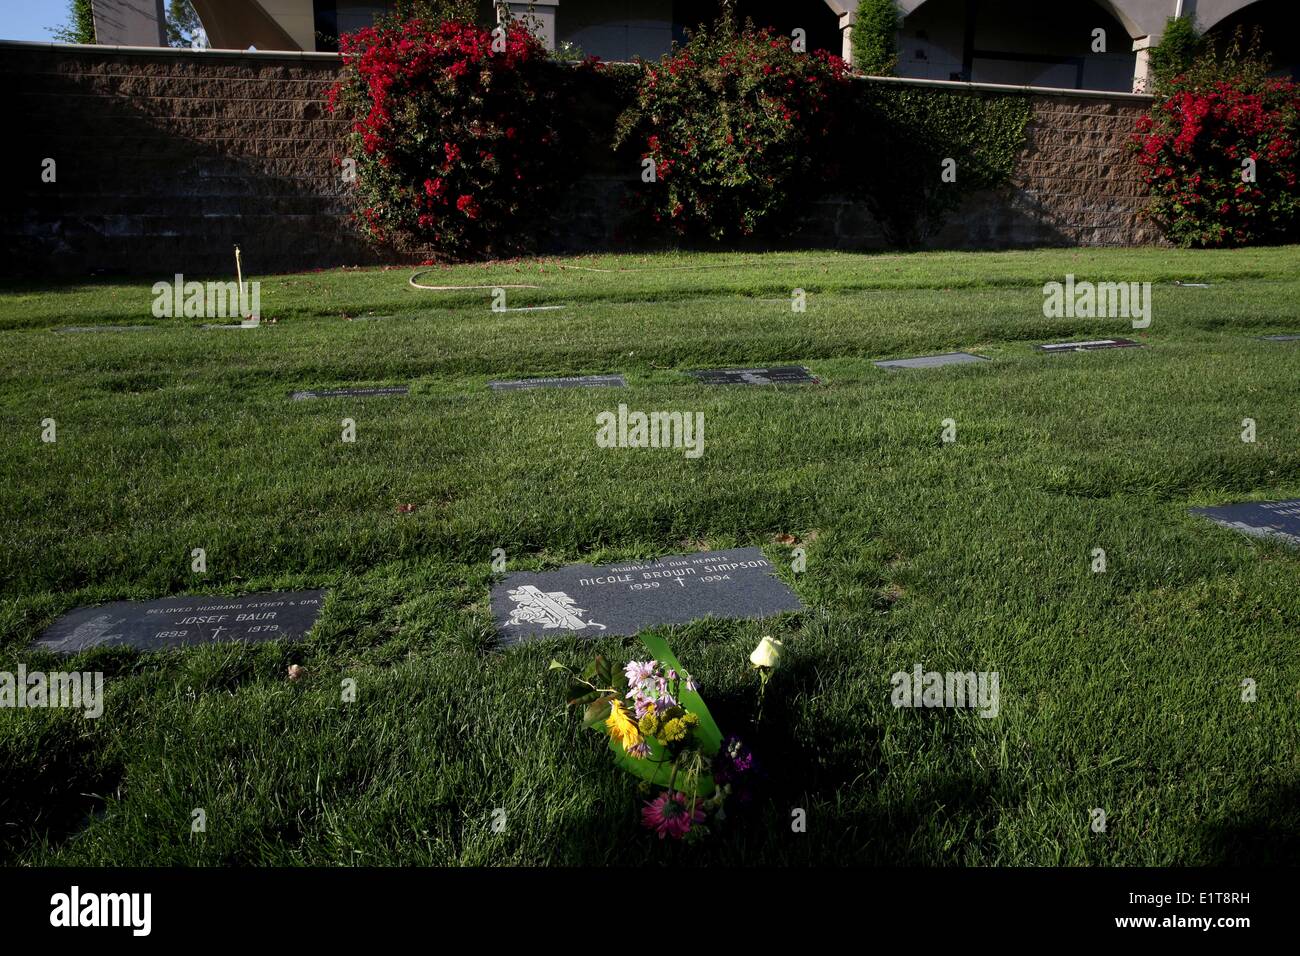 Lake Forest, California, USA. 09th June, 2014. Wilting flowers at the grave site of Nicole Brown Simpson at the Ascension Cemetery in Lake Forest, California, 20 years after her murder. At 12:10 a.m. on June 13, 1994, Nicole Brown Simpson and Ronald Goldman were found murdered outside Brown's Bundy Drive condo in the Brentwood area of Los Angeles. Suspicion quickly focused on her former husband, professional football player O. J. Simpson, who had beaten Nicole in the past and had no alibi. Credit:  ZUMA Press, Inc./Alamy Live News Stock Photo